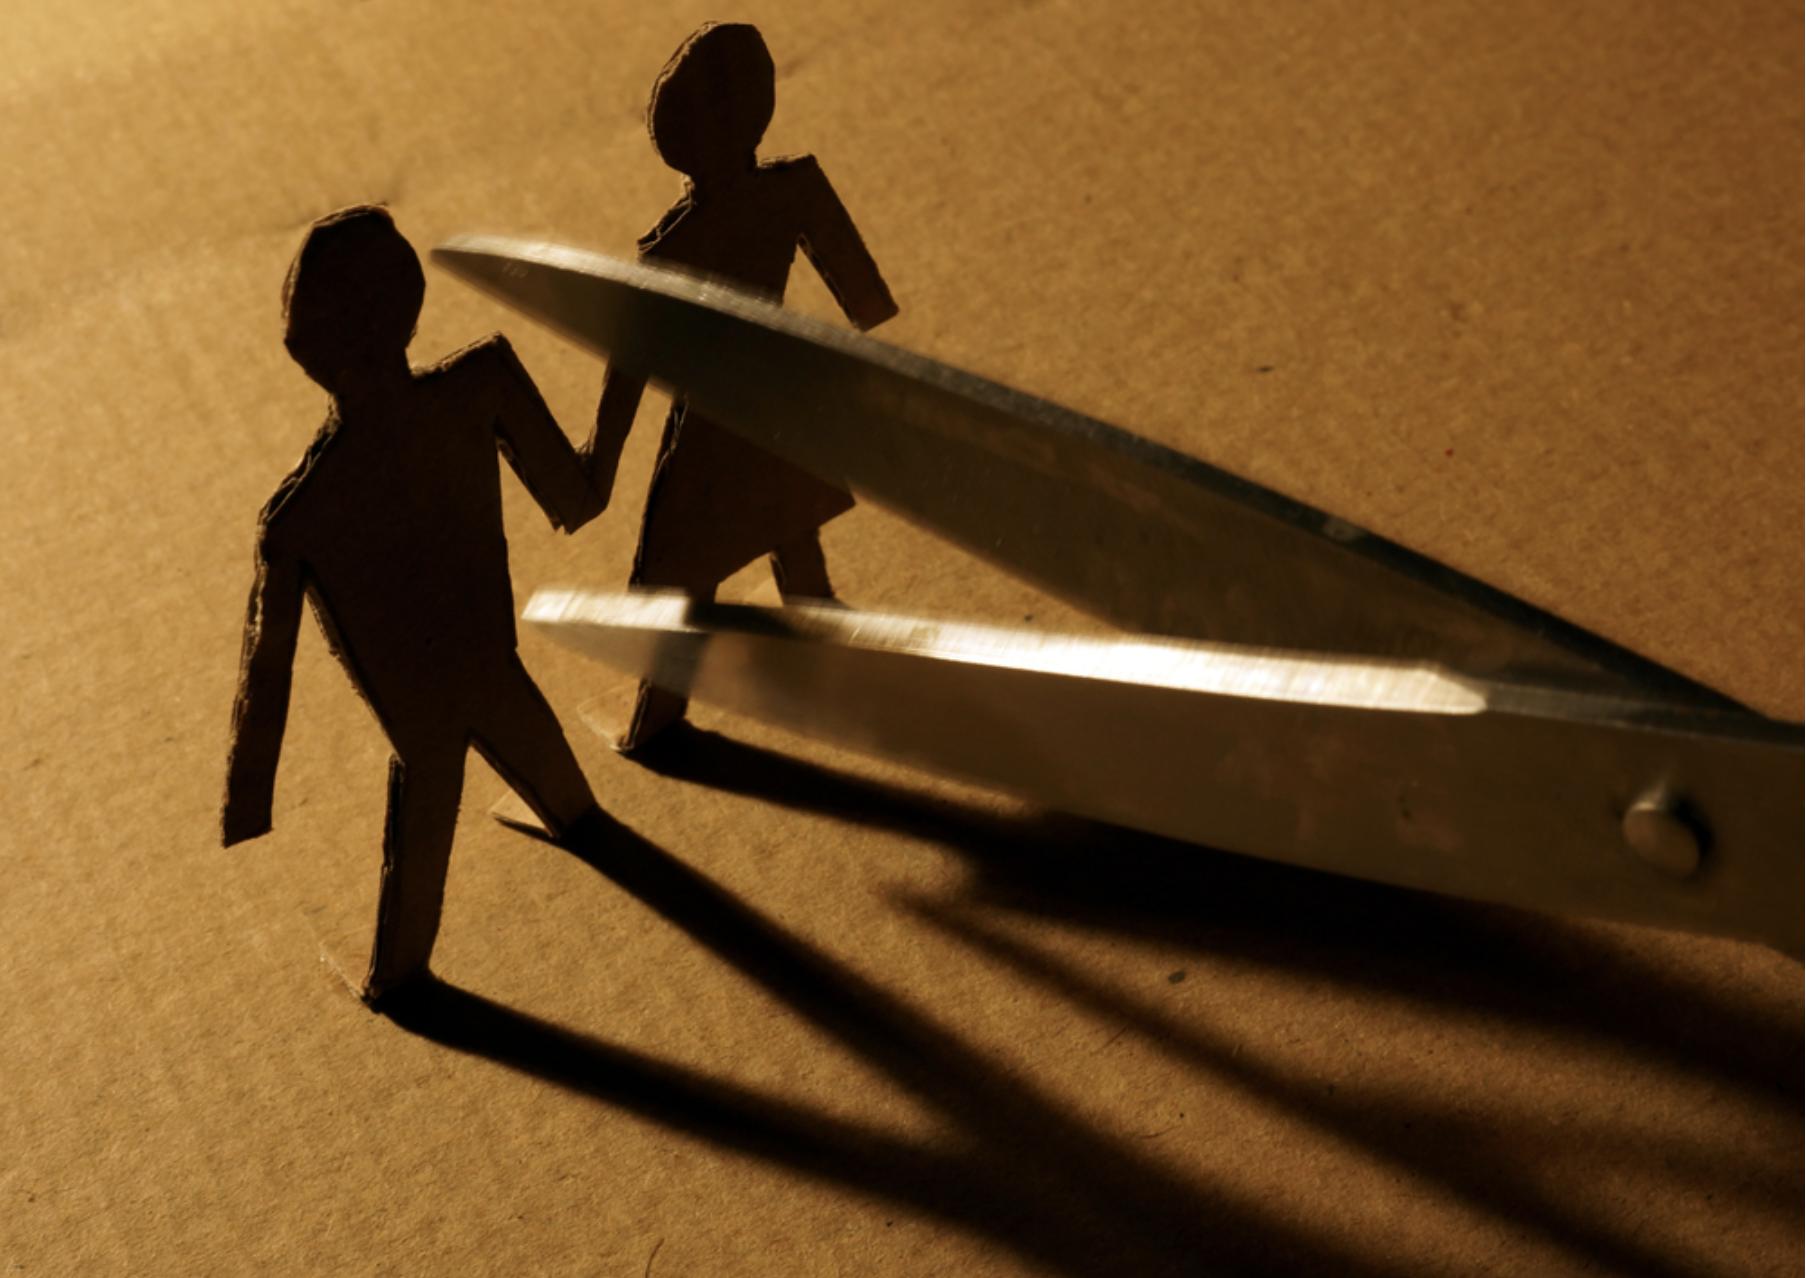 Scissors cutting a cardboard cutout of a man and woman representing a couple separating.